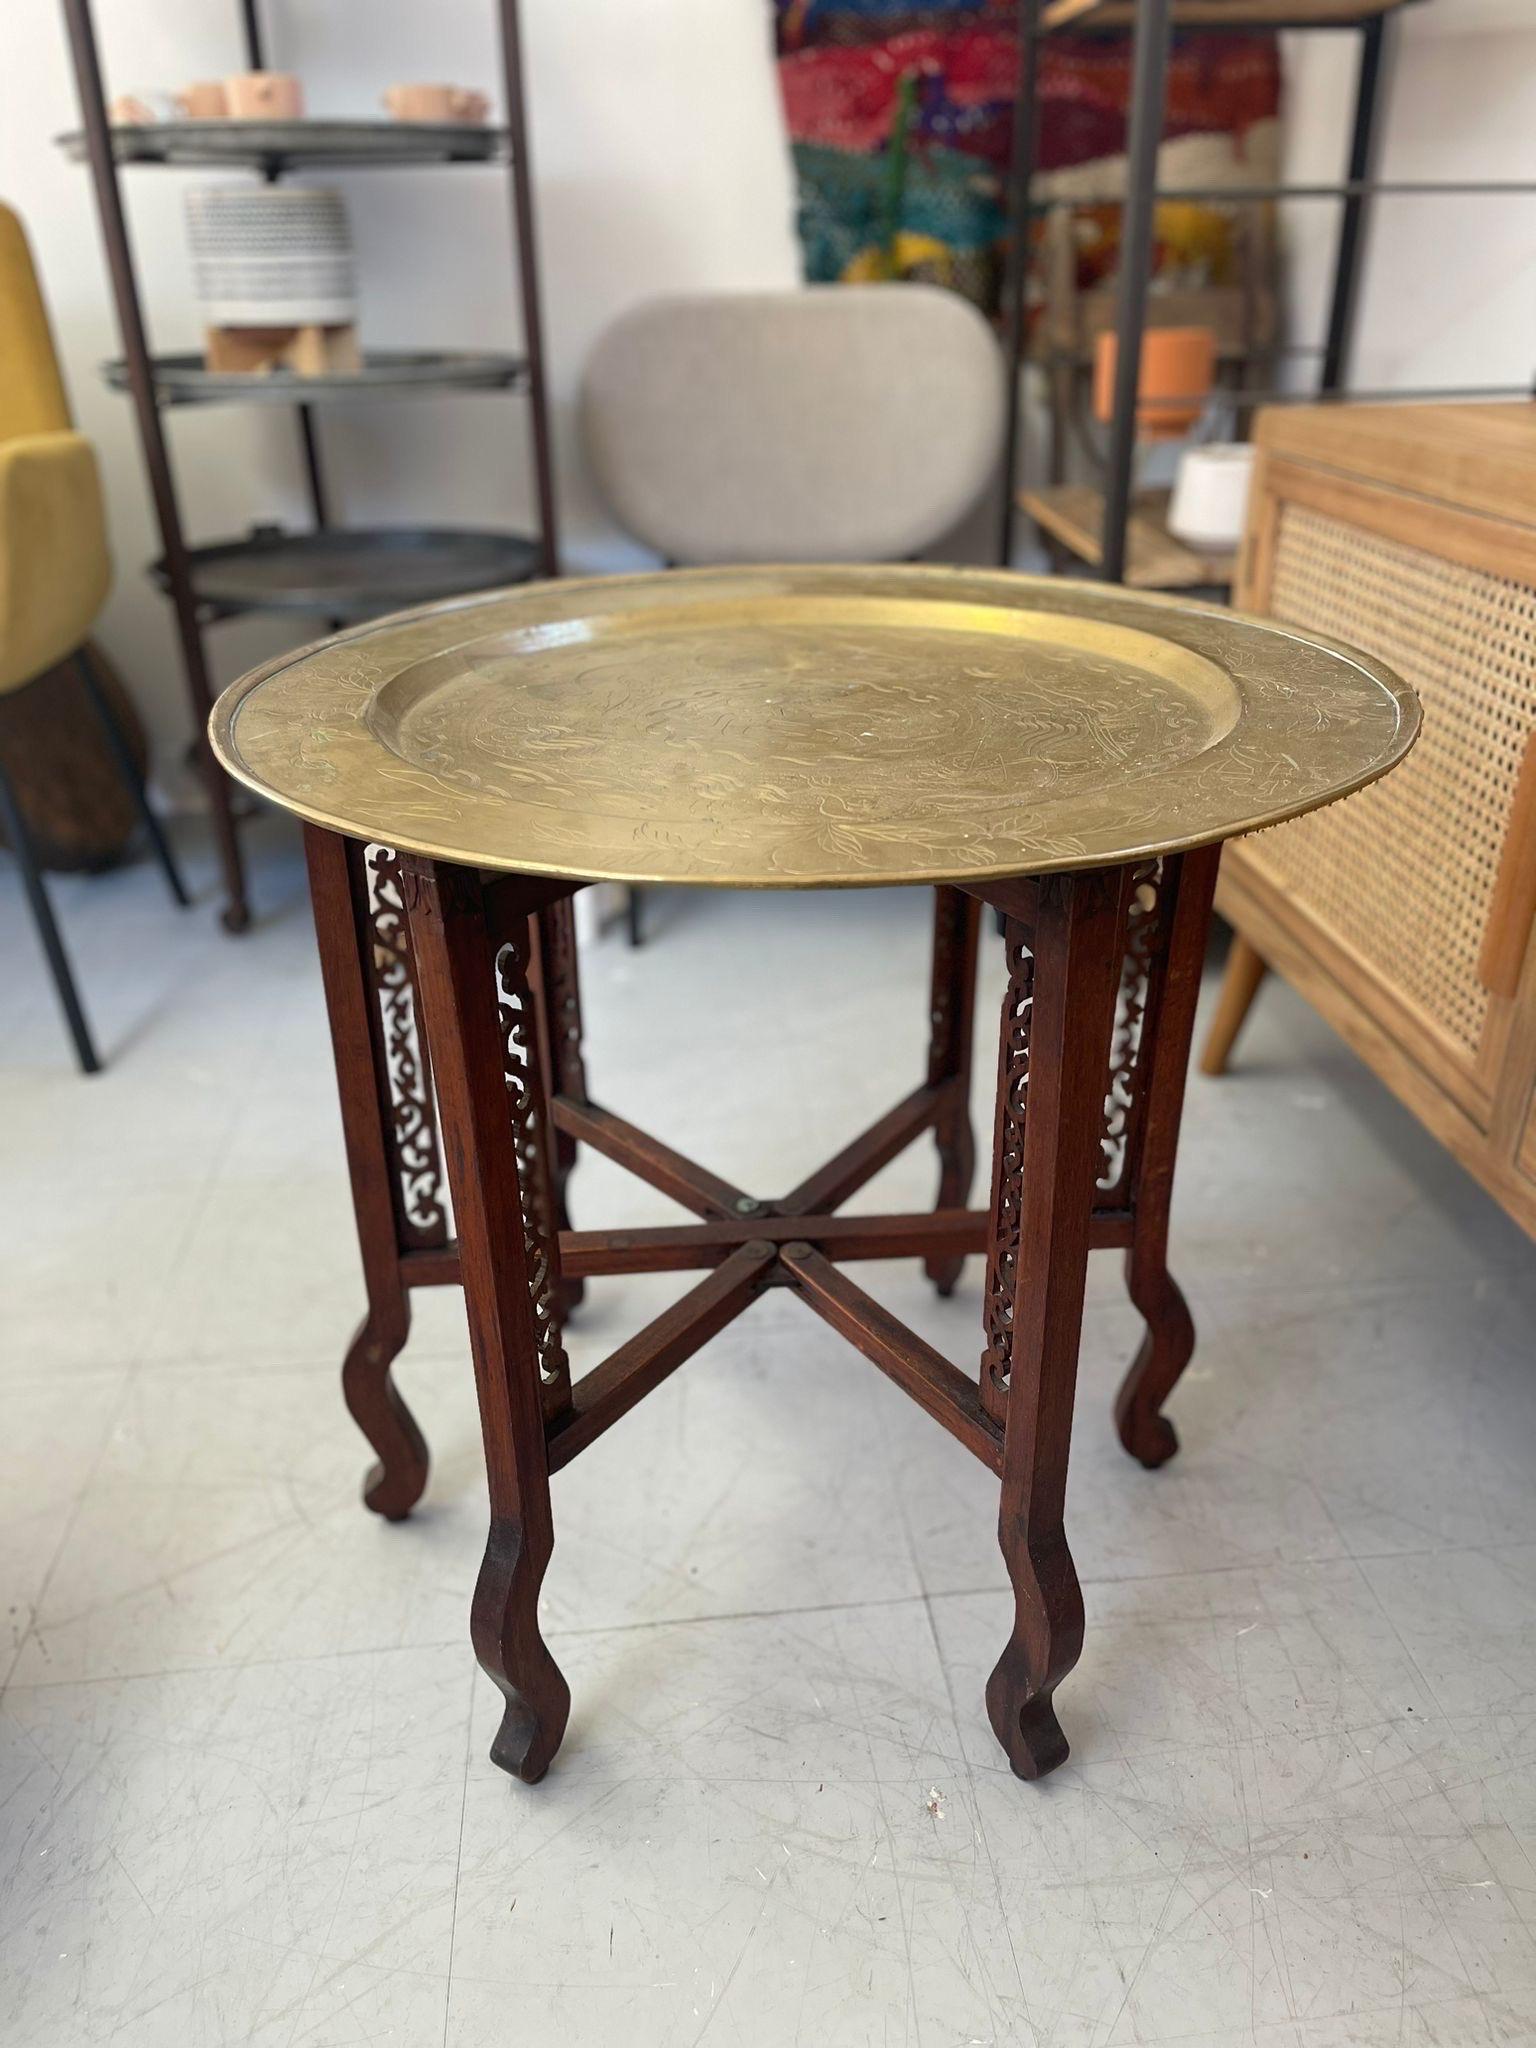 Antique Style Table with intricate Markings on the Top.Base has Wood Carved Features and Unit Legs.Top is Detachable. Vintage Condition Consistent withSge as Pictured.

Dimensions. 26 Diameter; 24 H